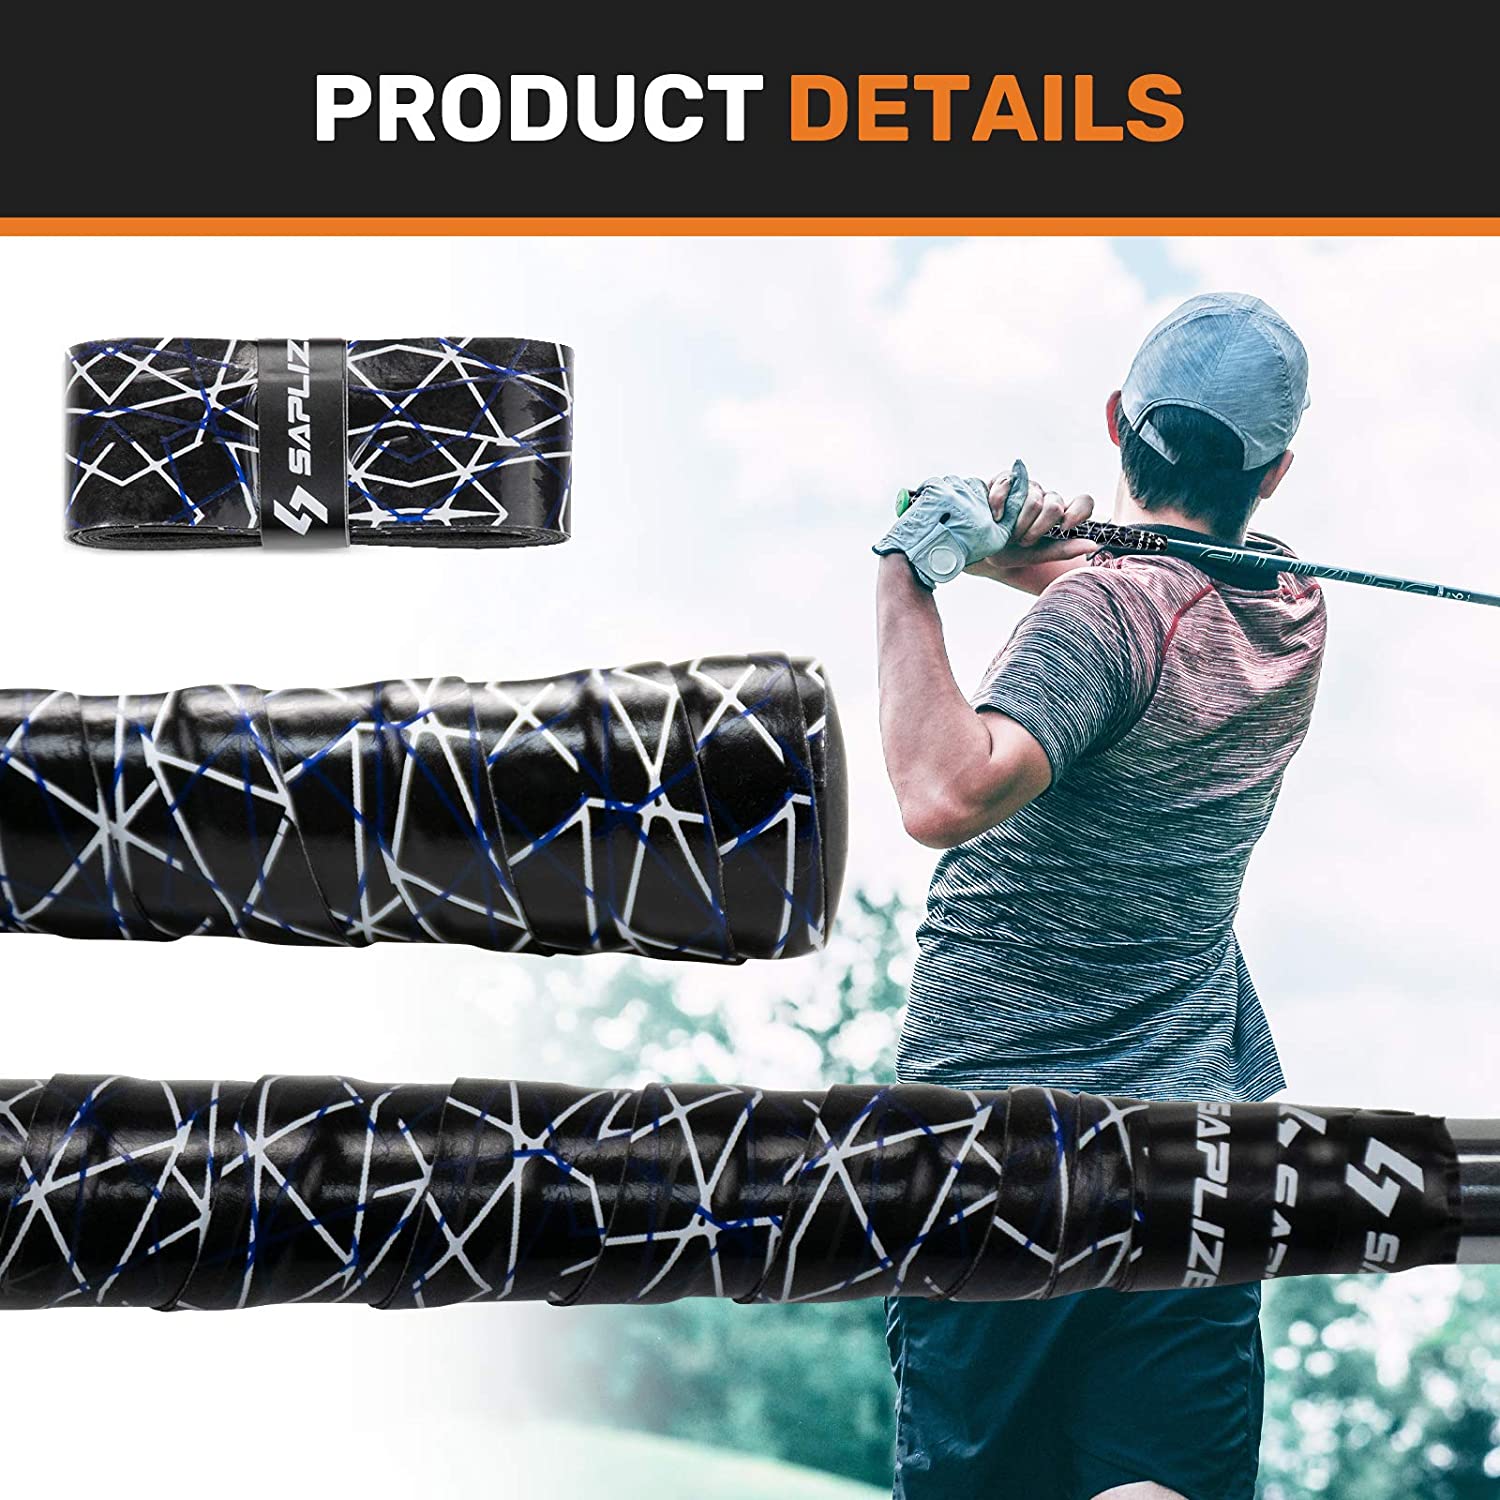 15 Pack Long Life Wrapping Tapes Golf Grips, Super Anti-slip Golf Grips, Regripping No Need Vise Clamp